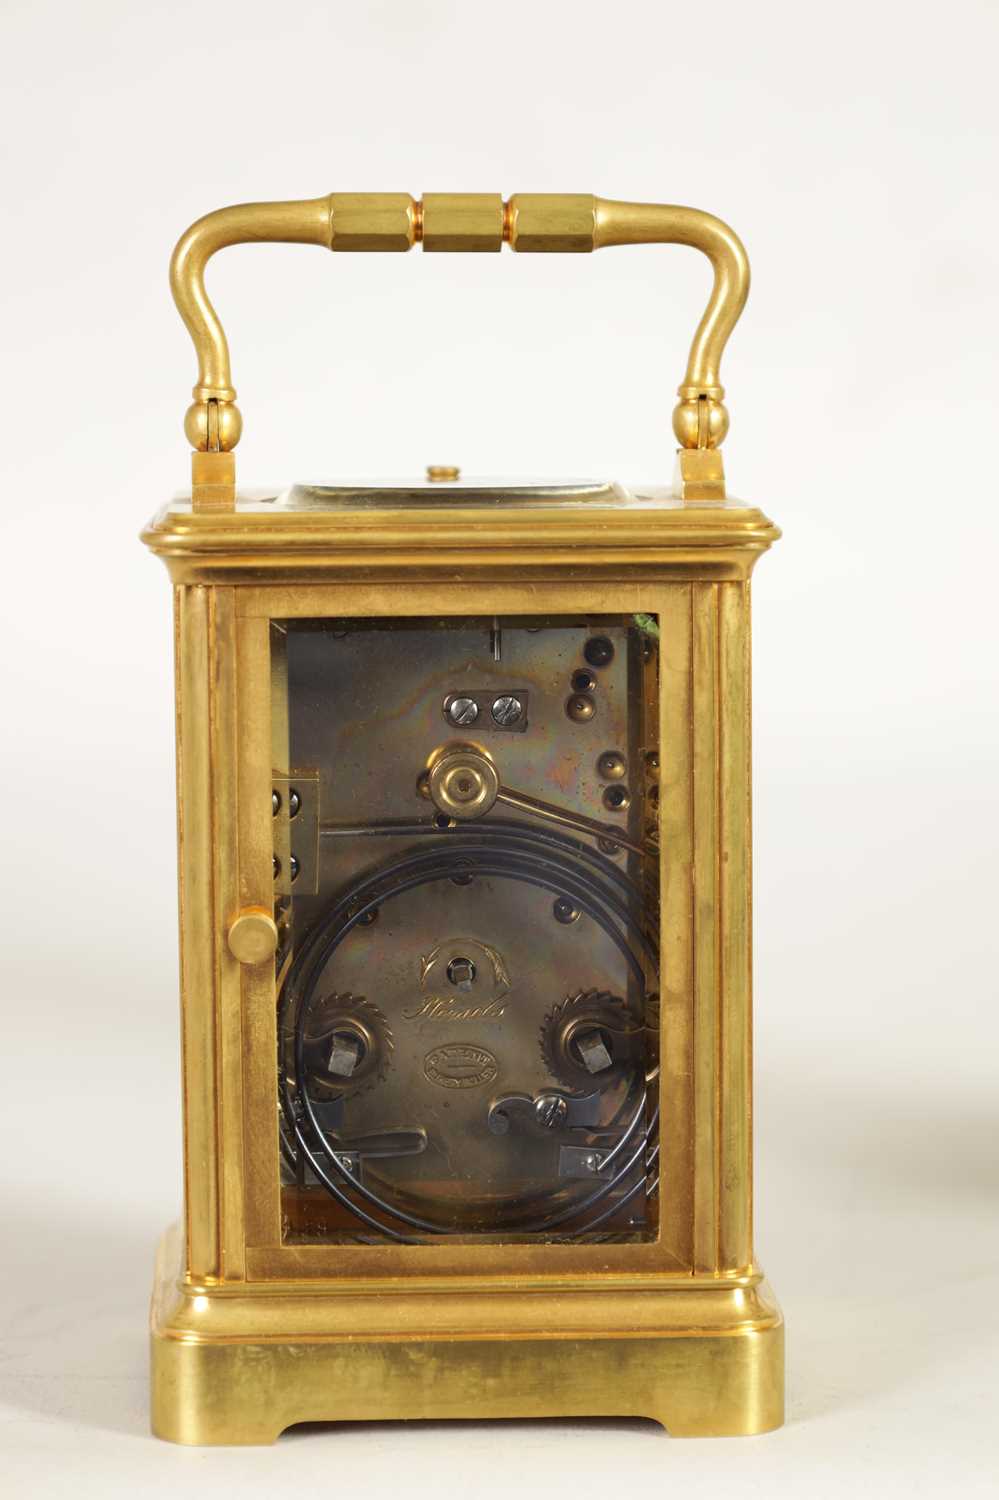 A LATE 19TH CENTURY FRENCH GILT BRASS AND CLOISONNE ENAMEL REPEATING CARRIGE CLOCK - Image 7 of 9